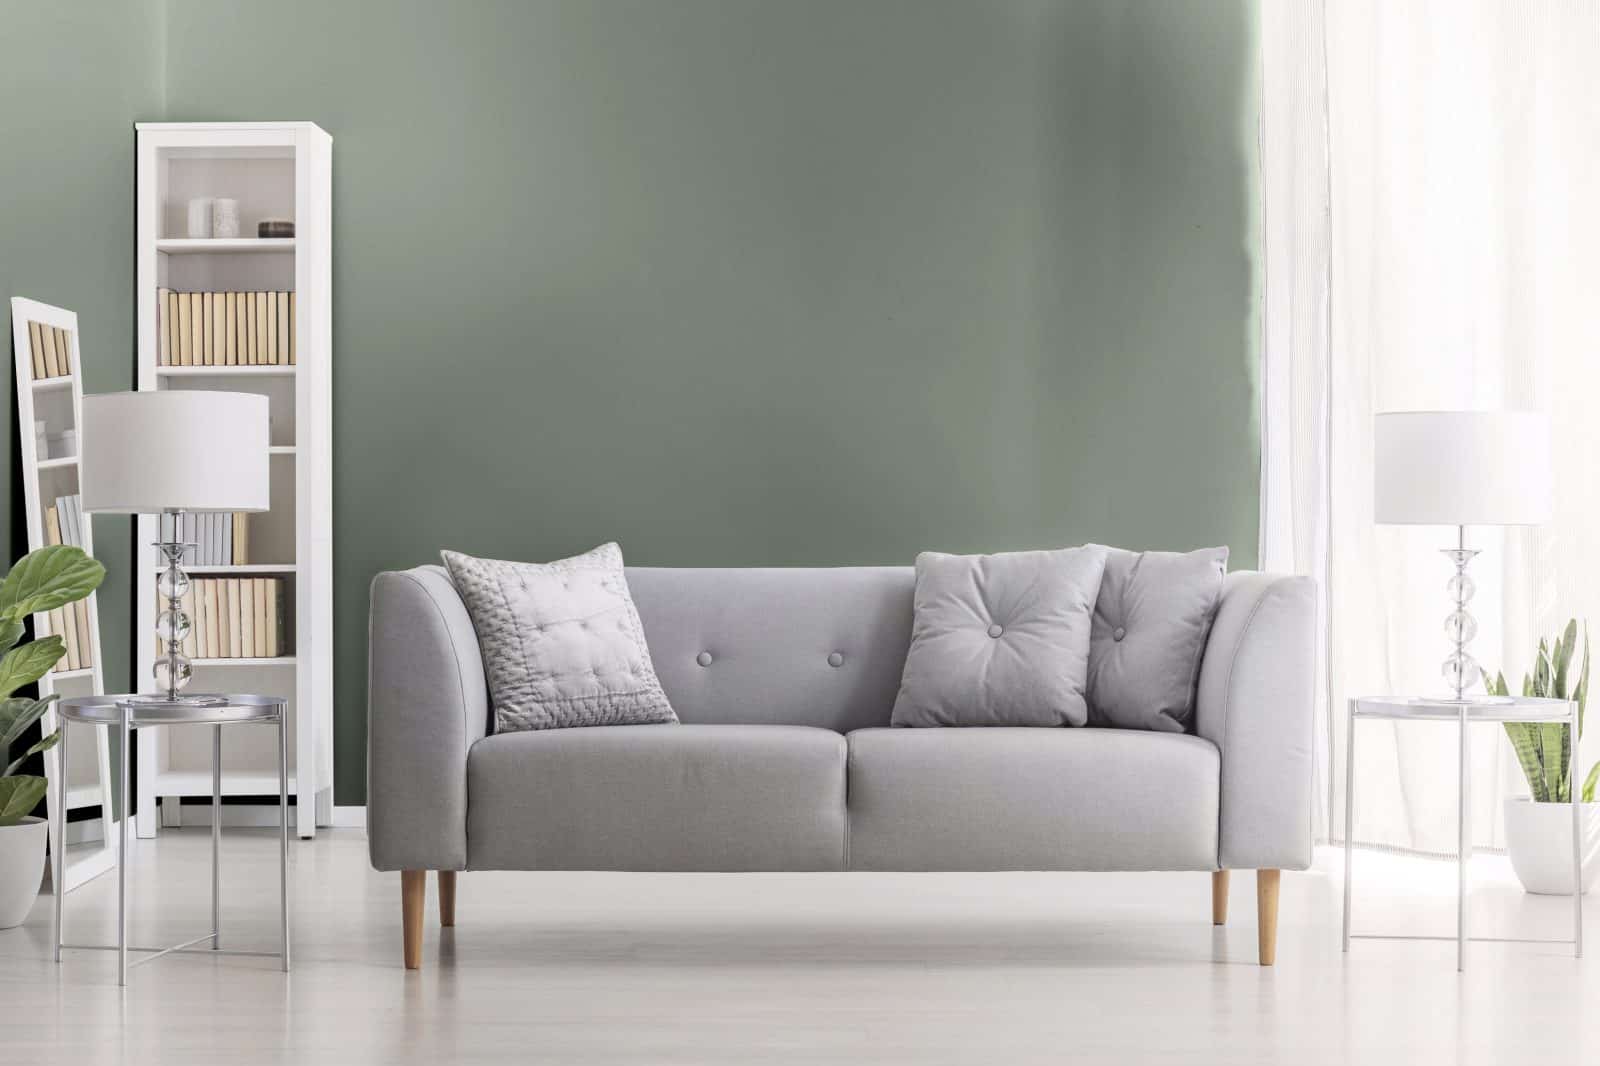 What Color to Paint Walls with Gray Couch – 10 Ideas